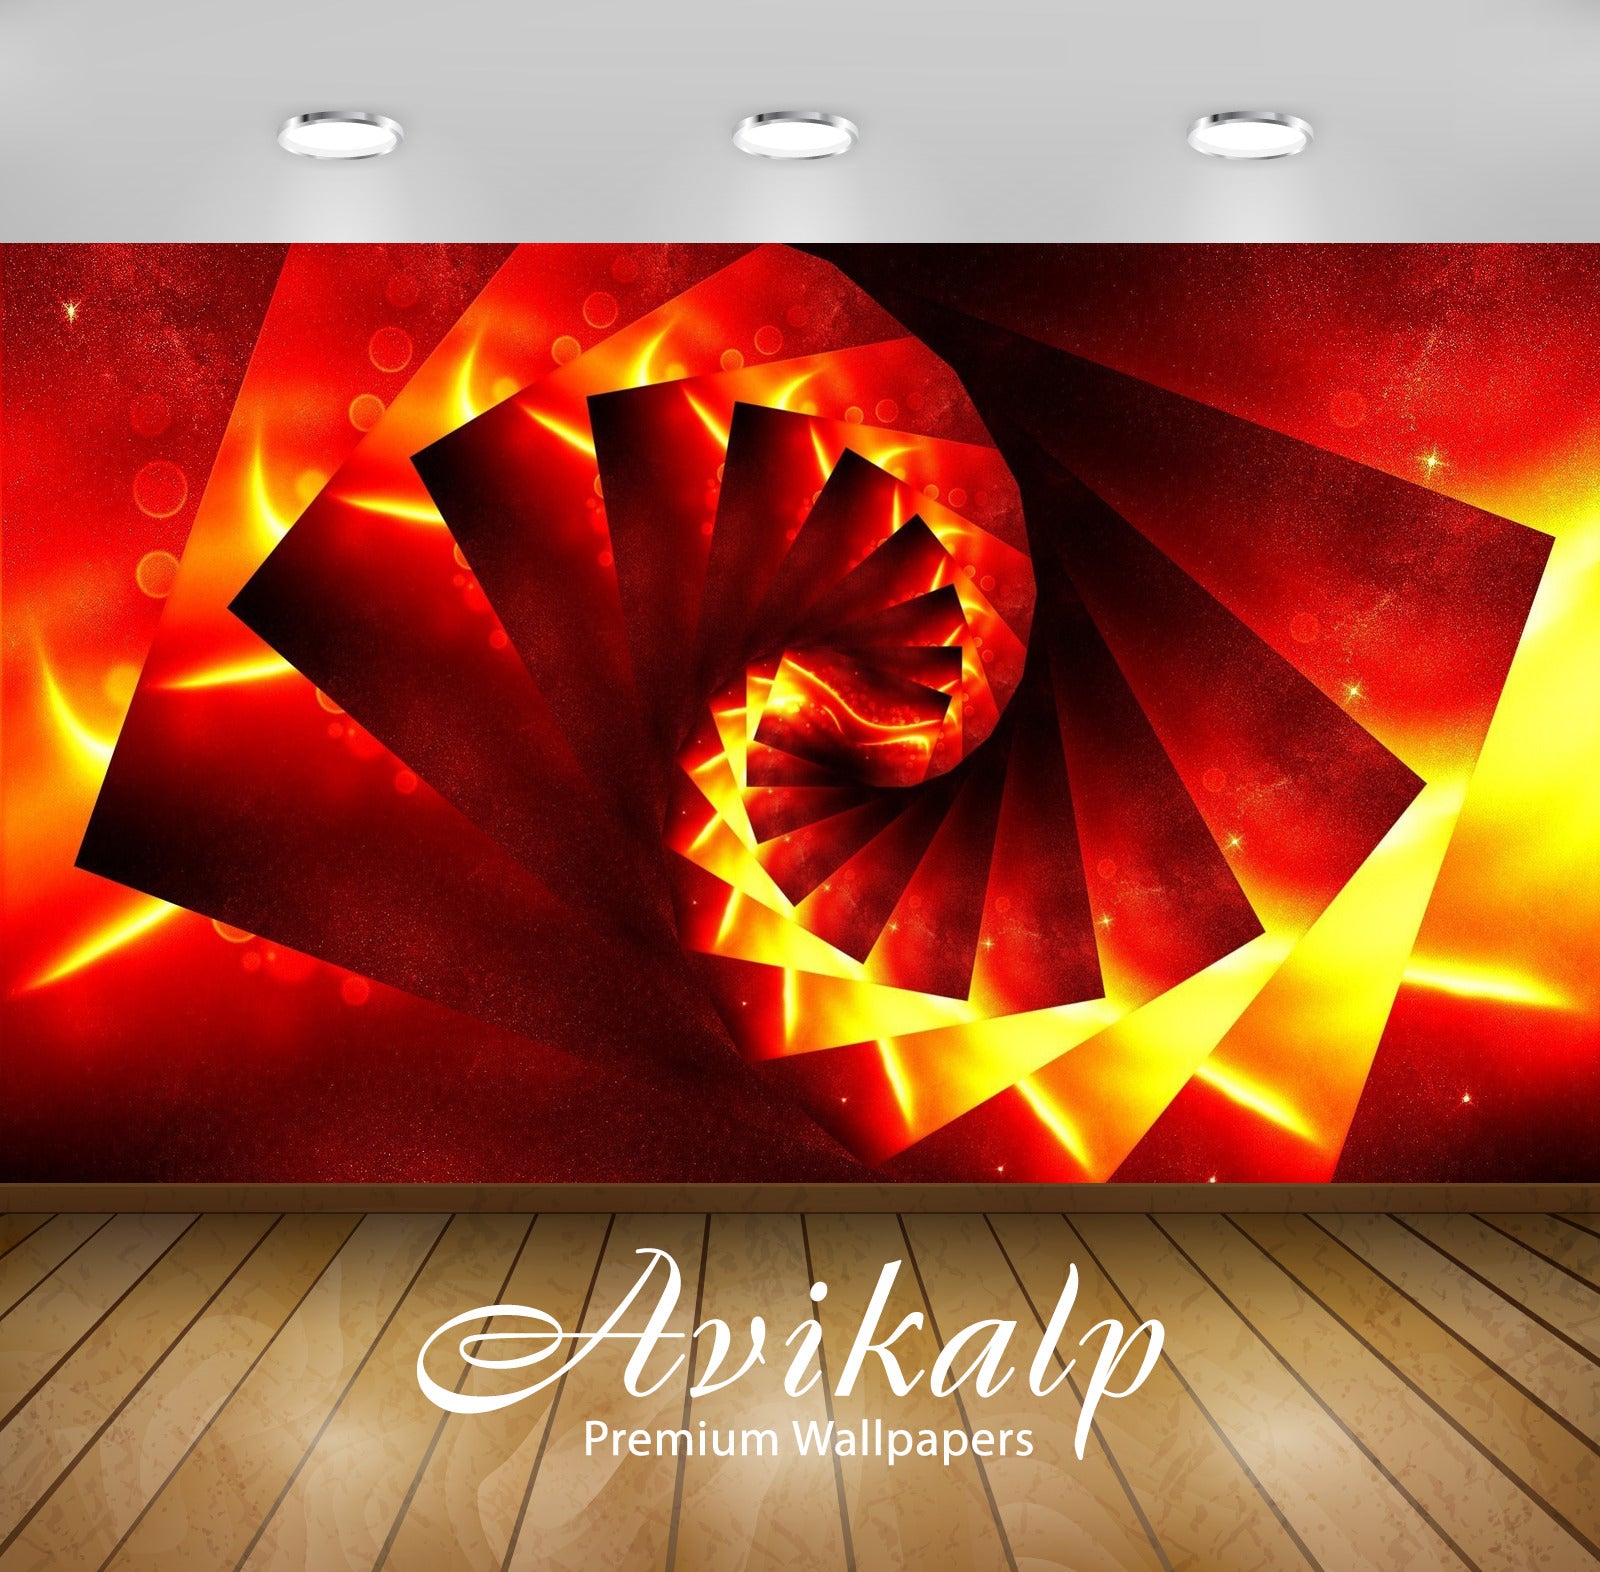 Avikalp Exclusive Awi4473 Lava Spiral Full HD Wallpapers for Living room, Hall, Kids Room, Kitchen,